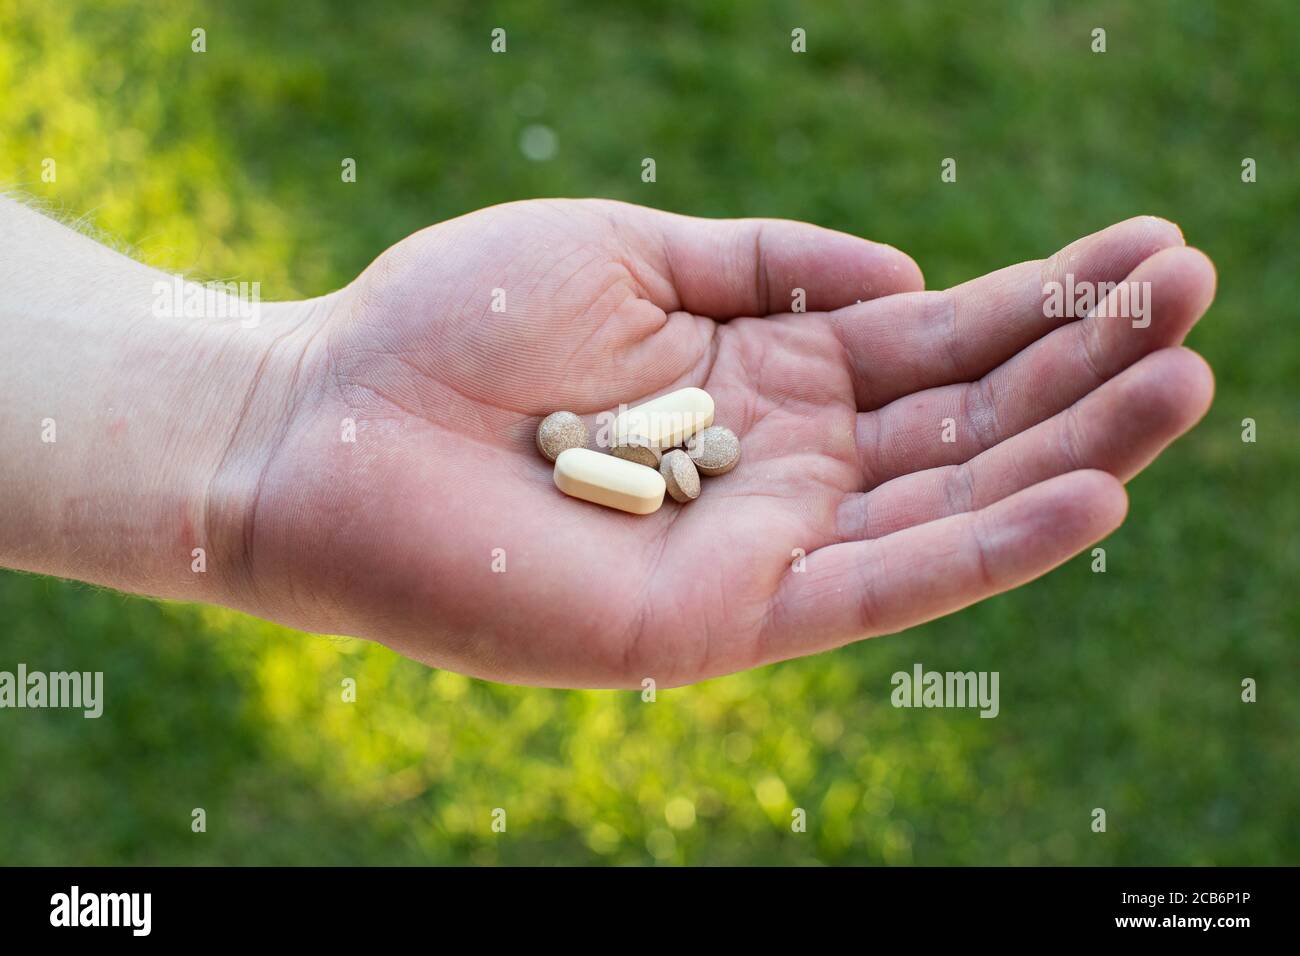 Brown and yellow Multi vitamin health pills cupped in a hand with a green natural background behind promoting health and well being Stock Photo